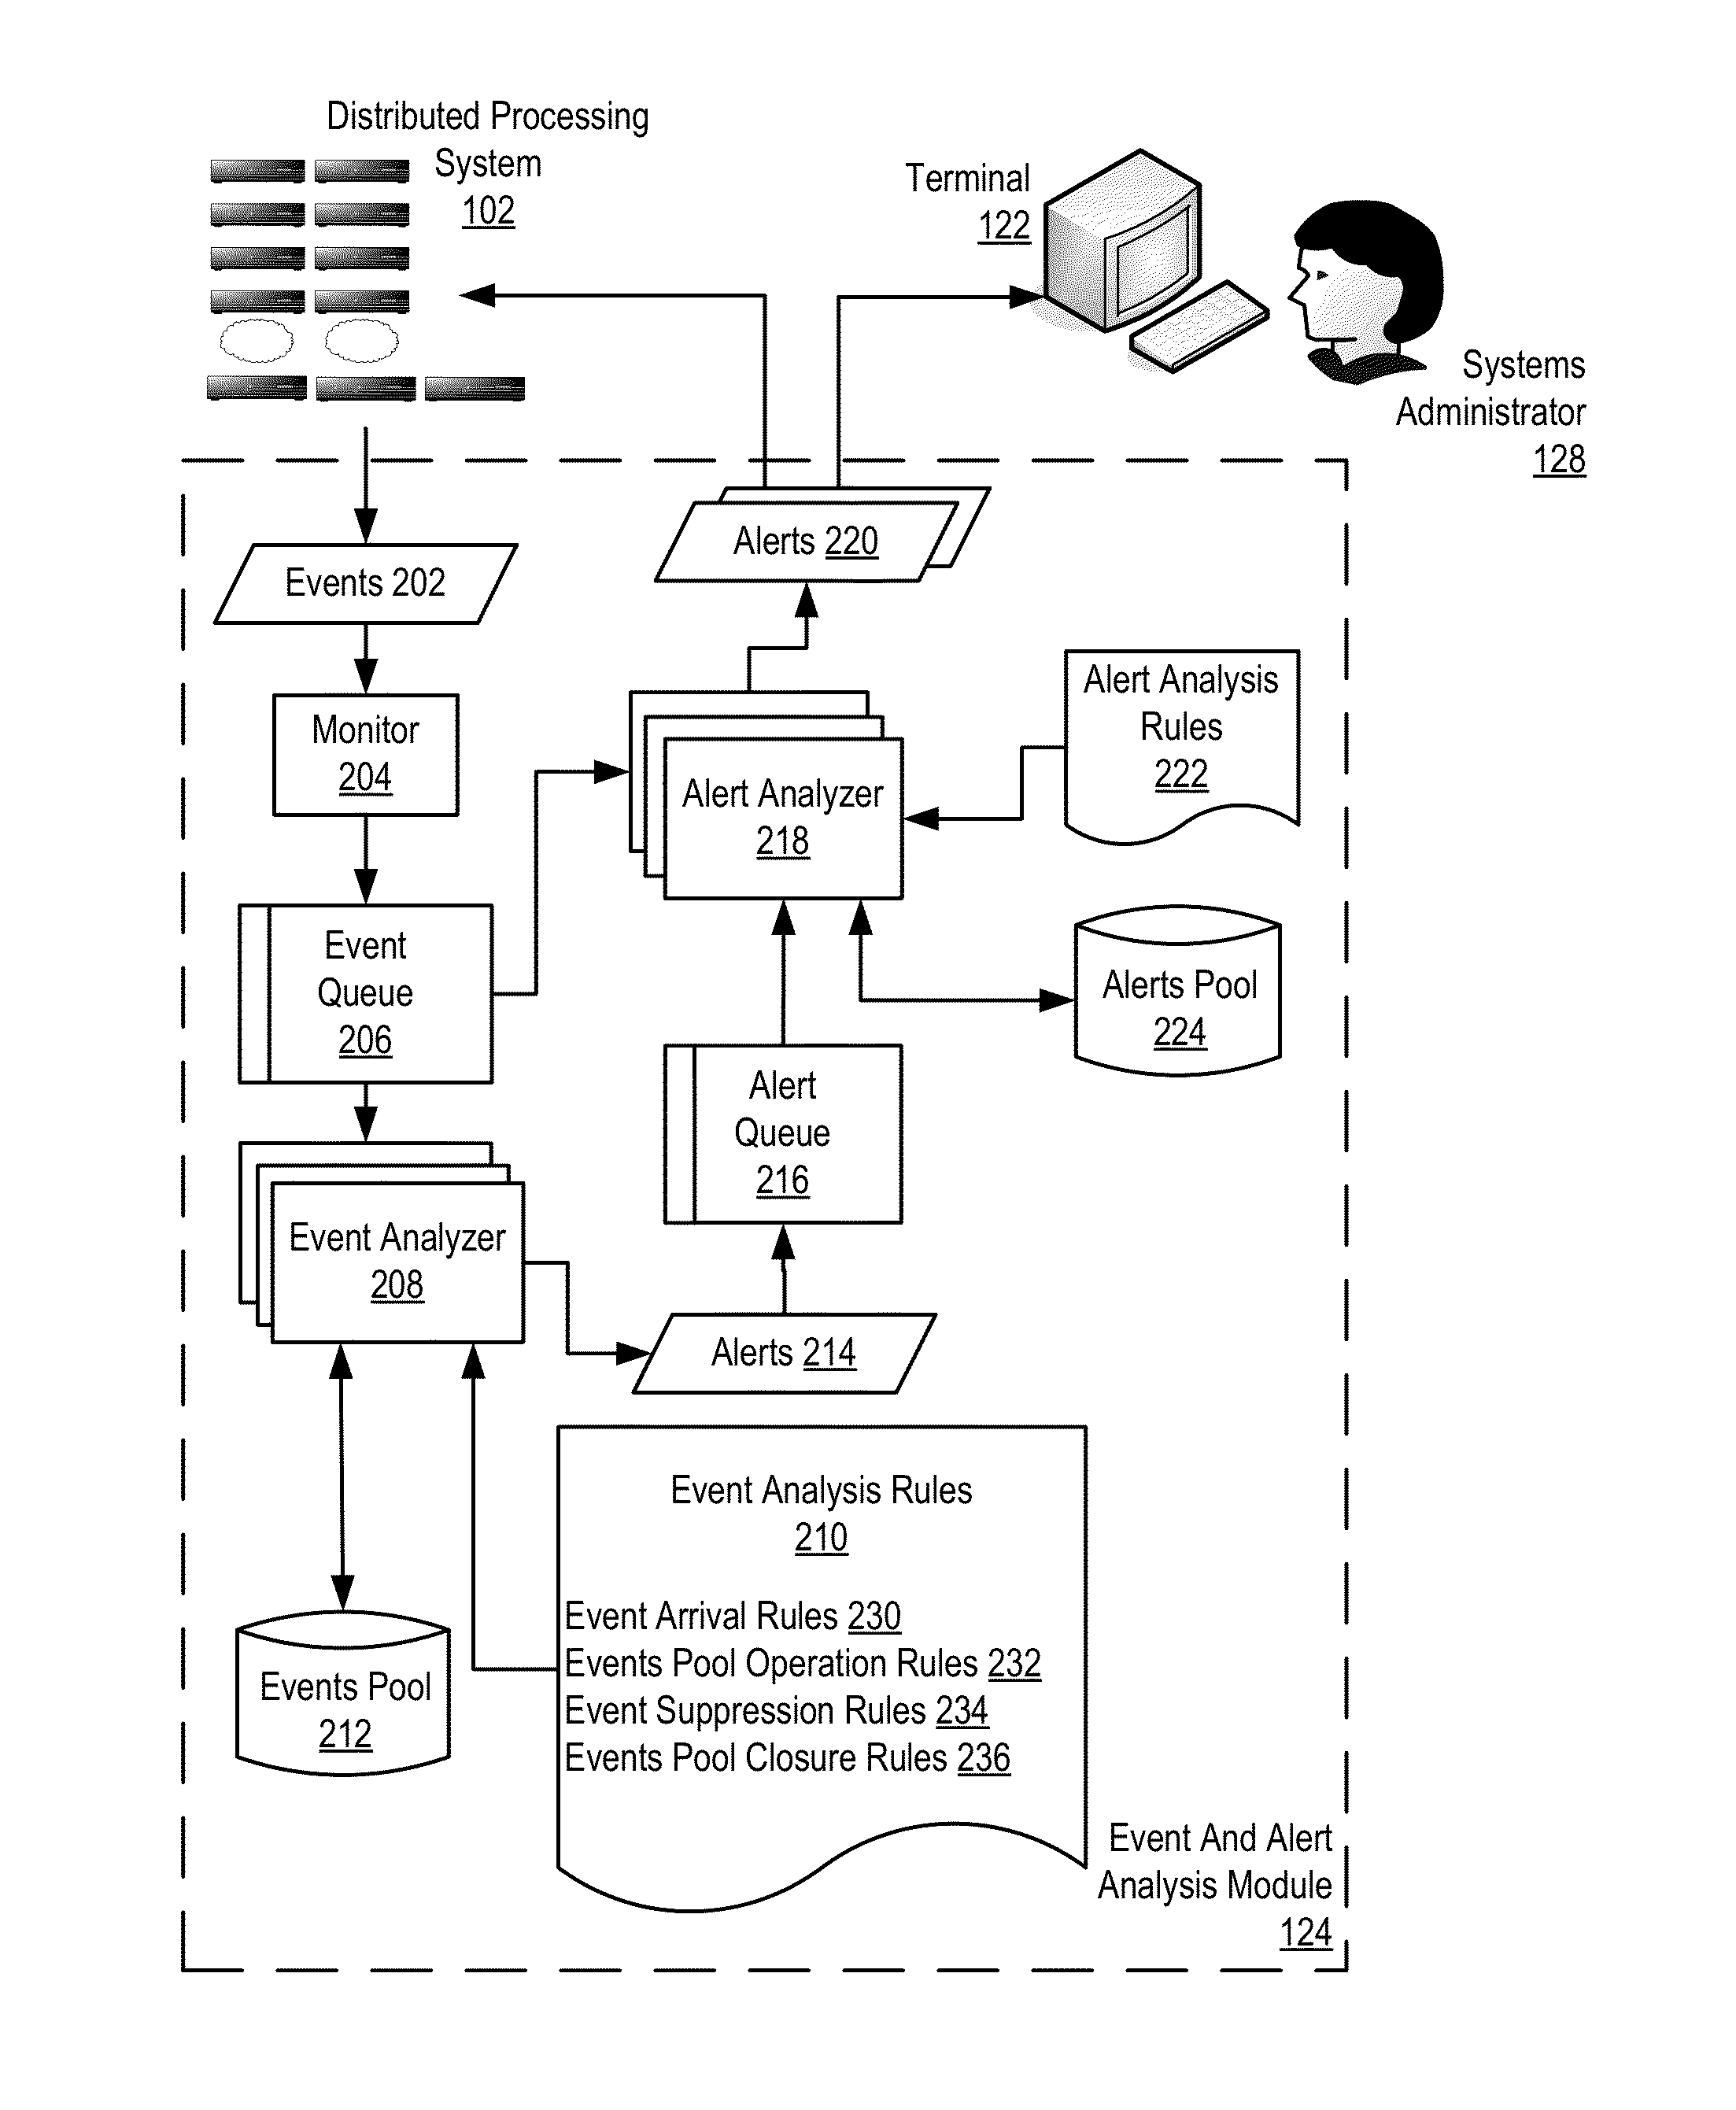 Selected alert delivery in a distributed processing system